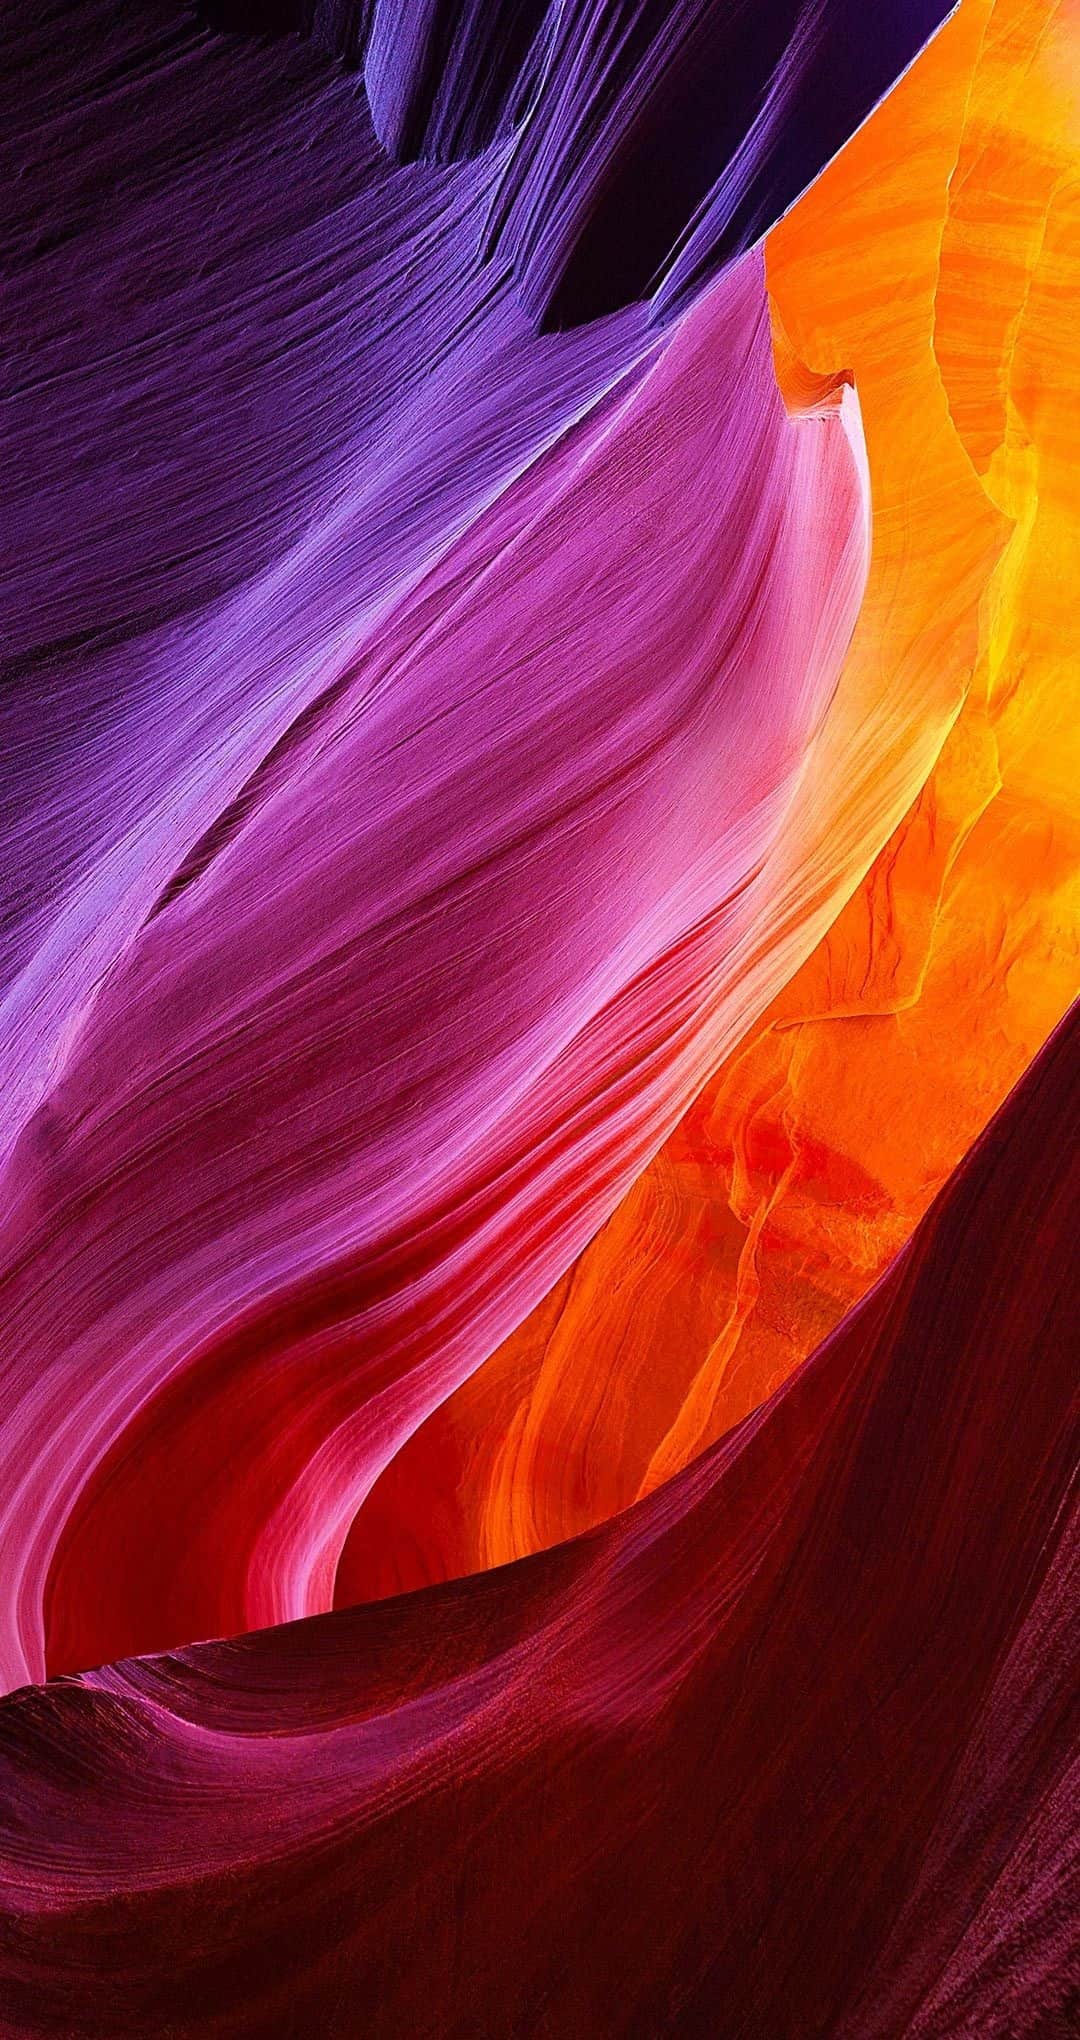 Redmi-Note-5A-Wallpapers